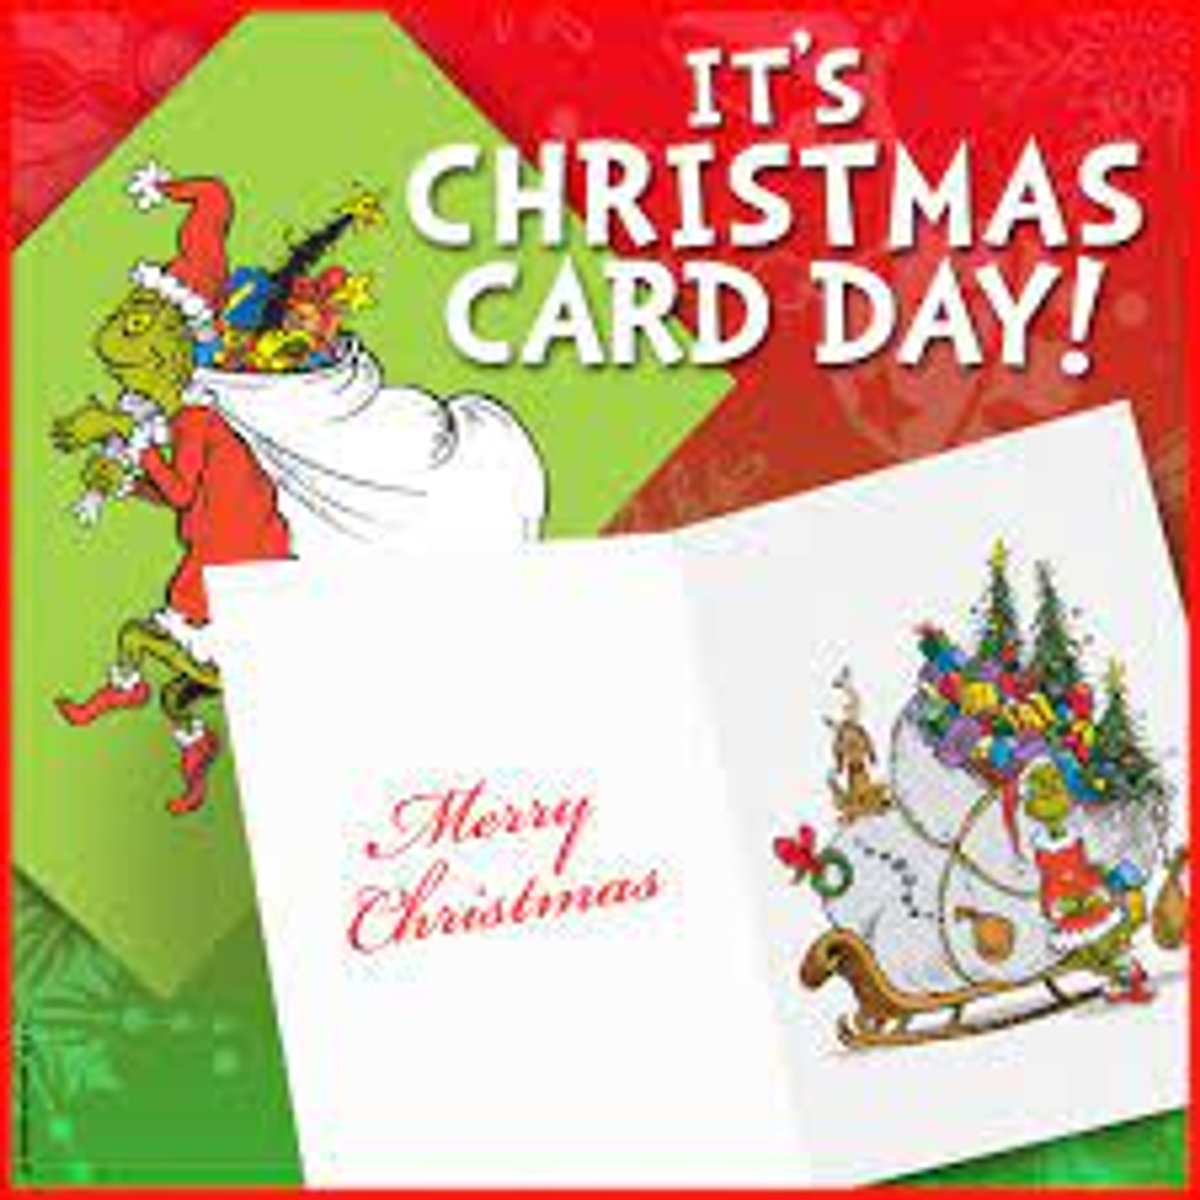 Today is #ChristmasCardDay which honors Sir Henry Cole. Cole who created the first commercial Christmas card in 1843. It grew into a tradition, people created a list of friends & family and the number of cards you received was a source of pride. Do you still send Christmas cards?